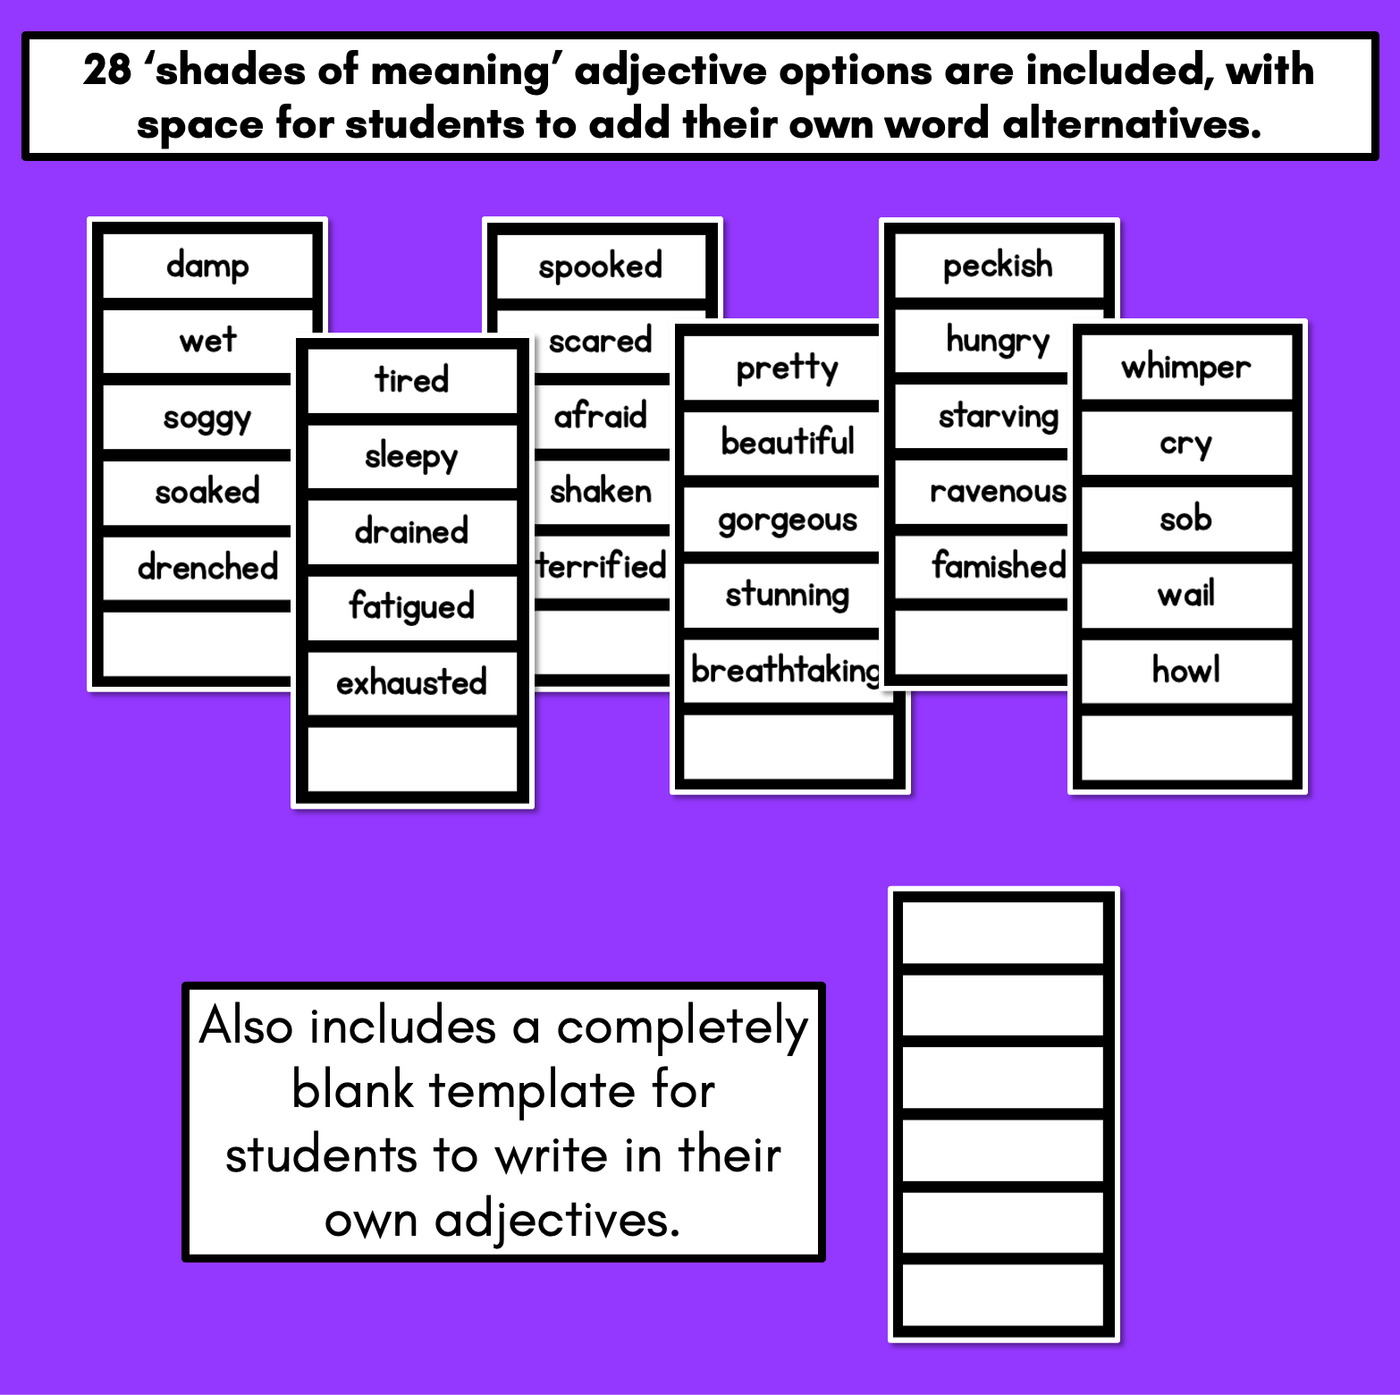 Shades of Meaning - Interactive Adjectives Activity